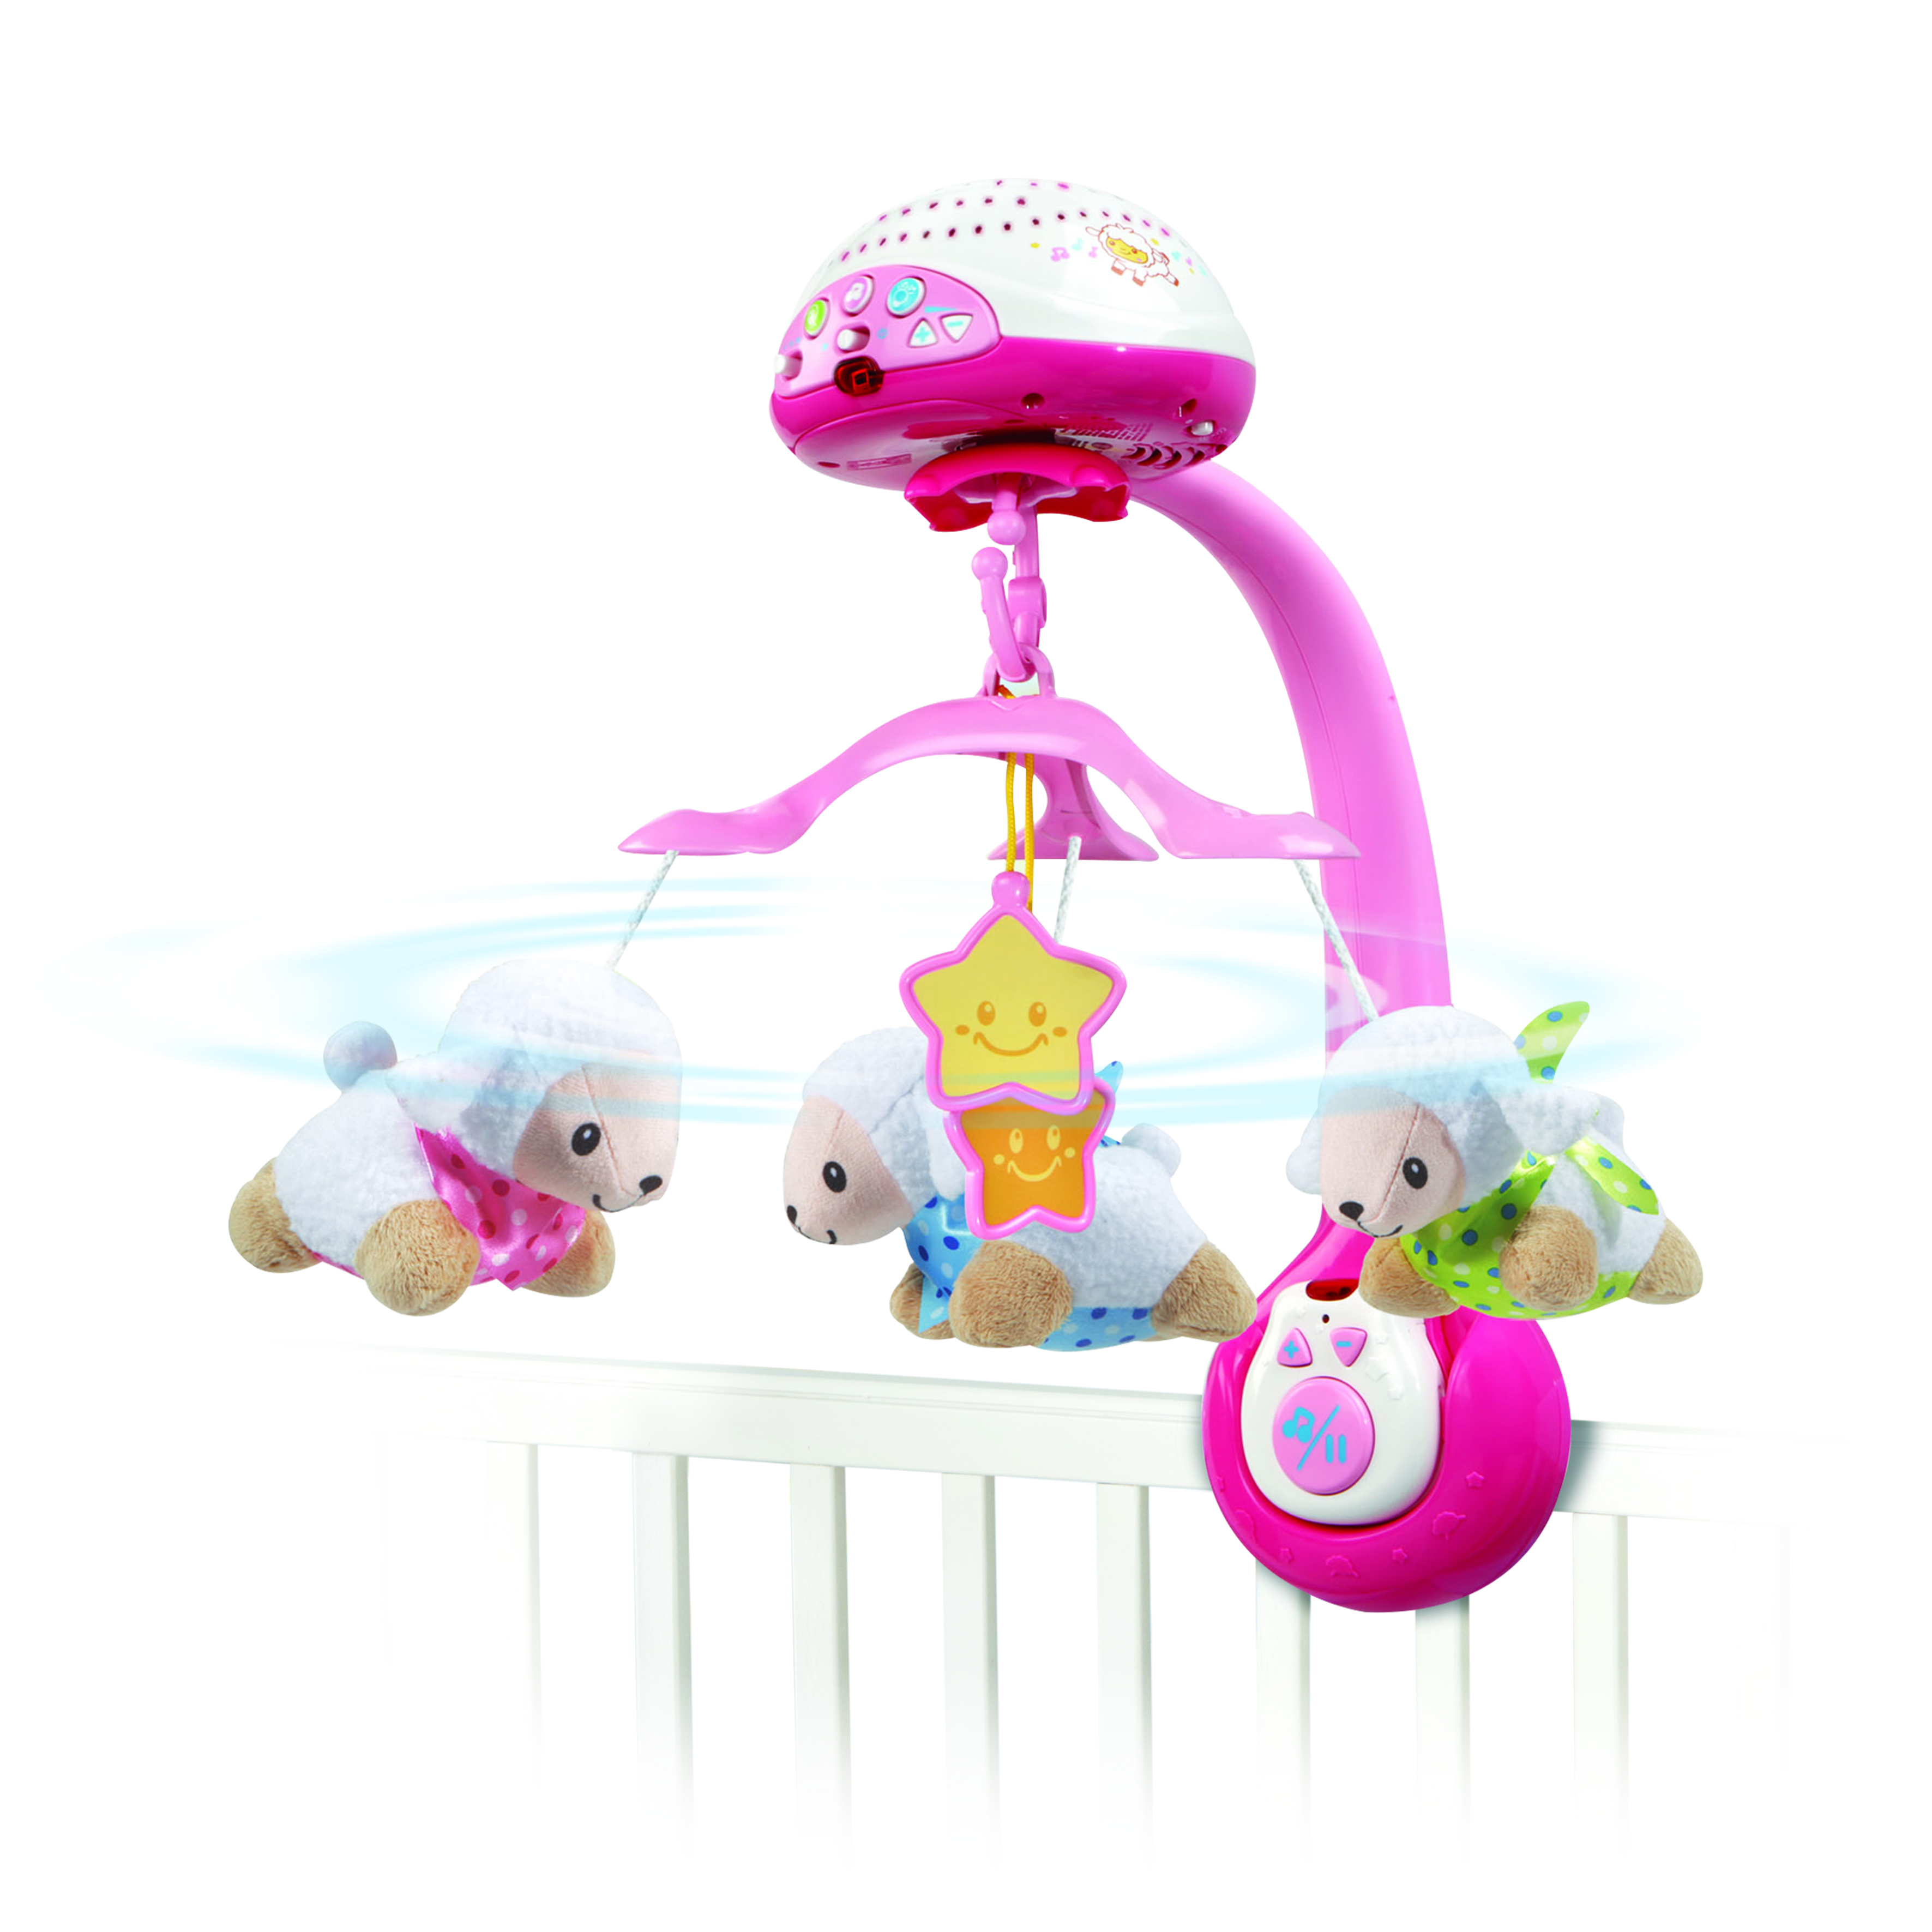 Lumi mobile Compte-moutons ROSE Vtech Baby